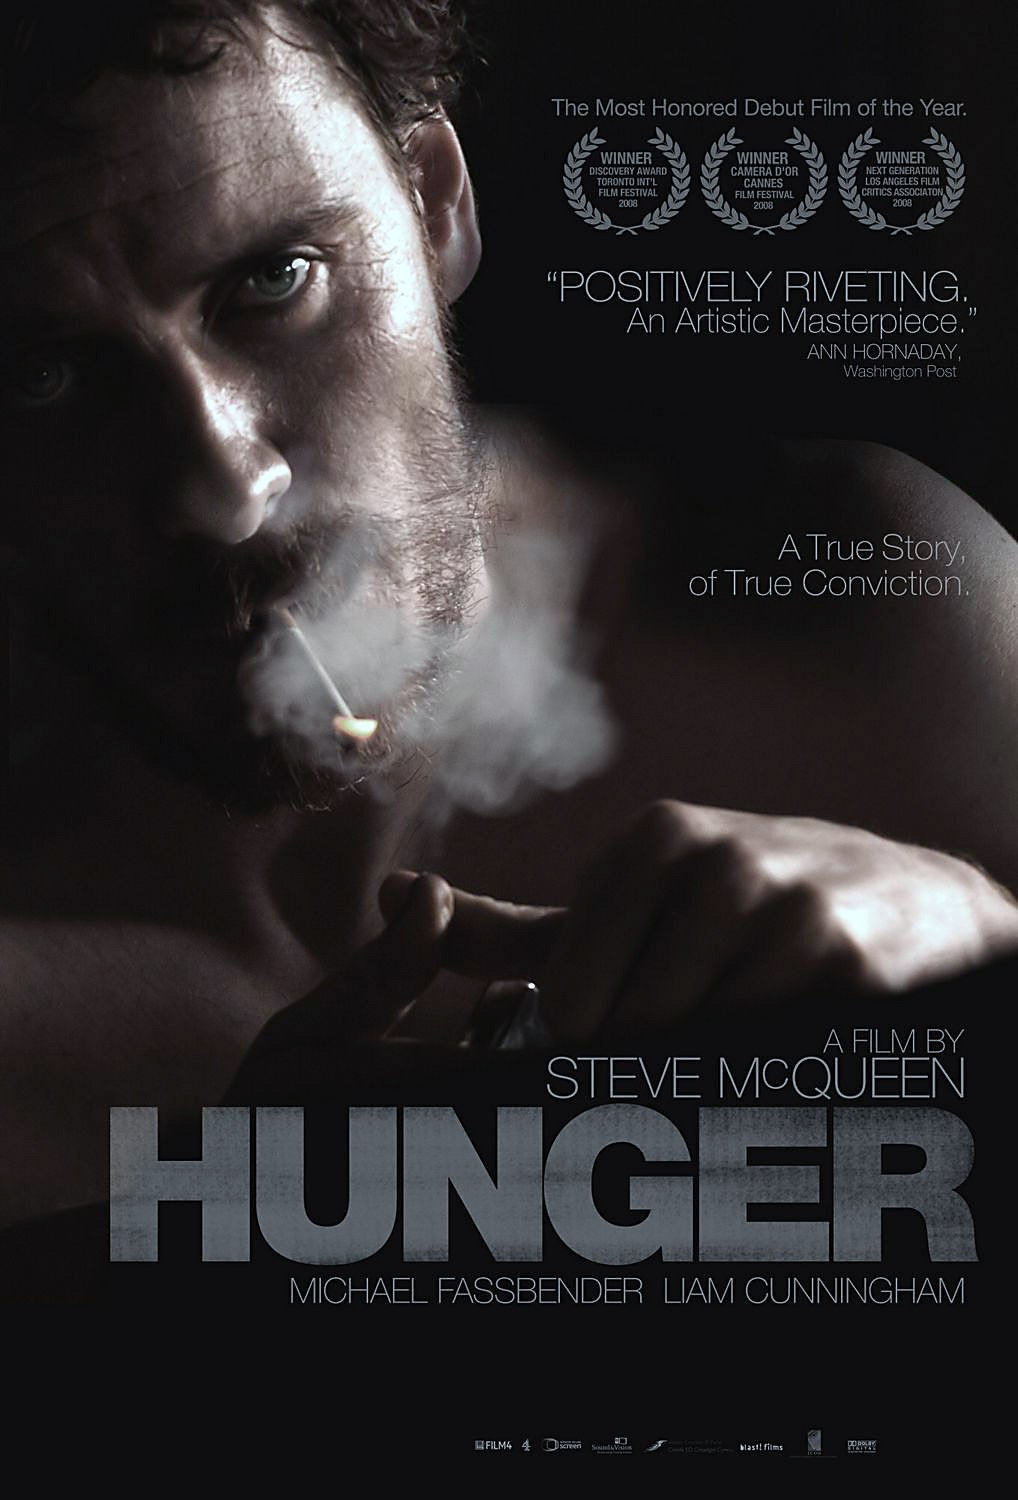 Poster for the movie "Hunger"